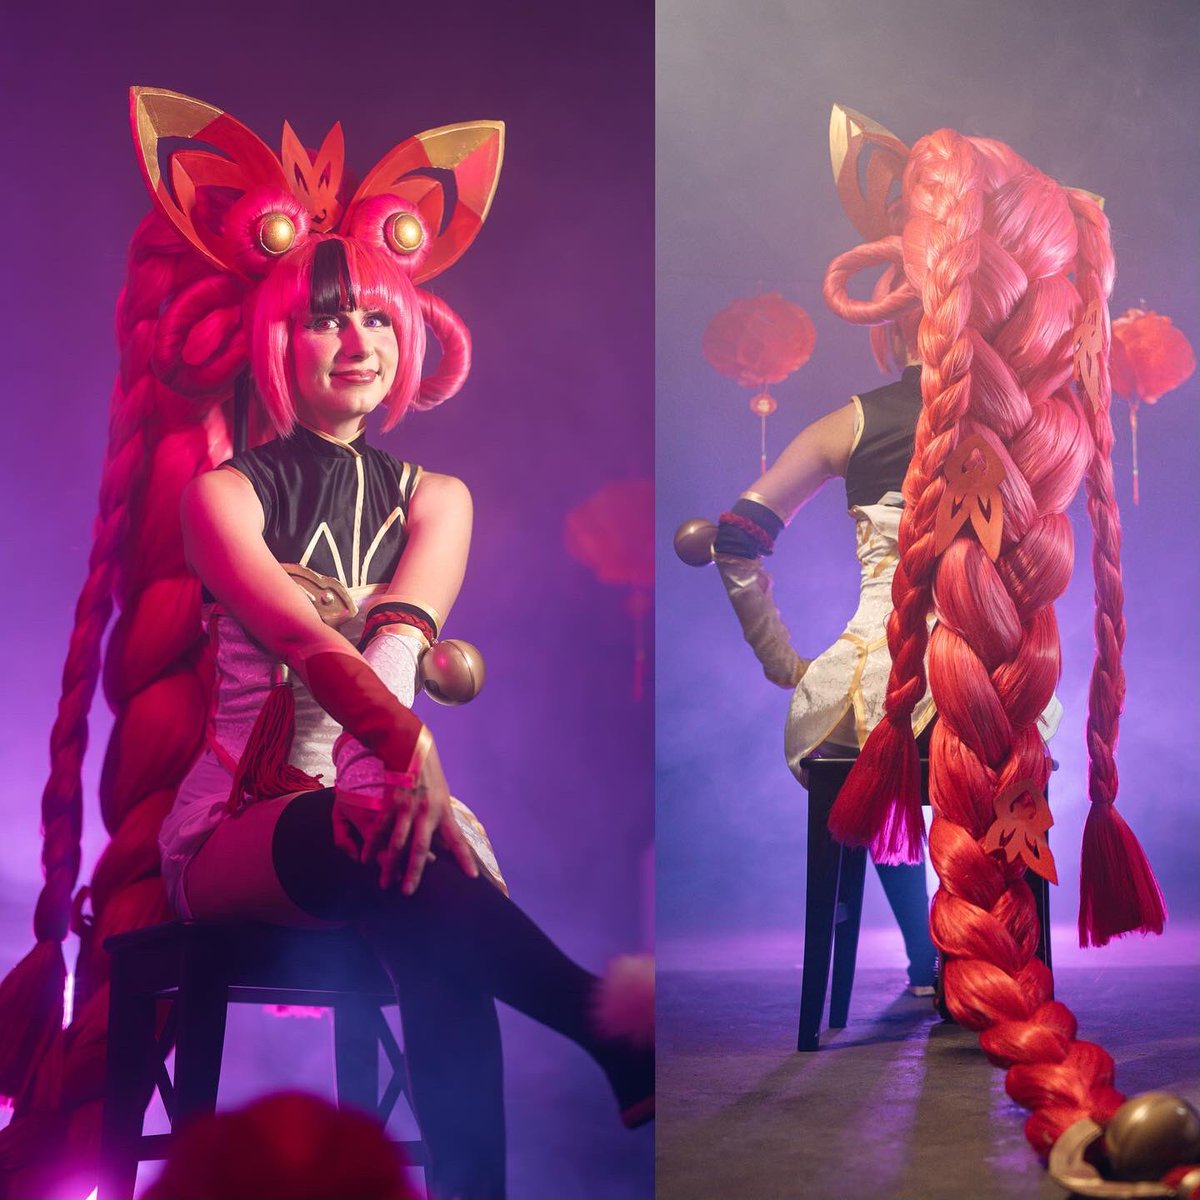 Okay, this is it, my entry for #ironwig round 3, by @ArdaWigs 💖 It is the final round and we were challenged to create a Zoe wig from #leaugeoflegends in her #mythmakerskin 💞 📸 @Von_Nao 💁🏻‍♀️ @SockenCosplay 💇🏻‍♀️💈 me 💄👗 Sara, me & @VandrobCosplay Assistant @b1nh